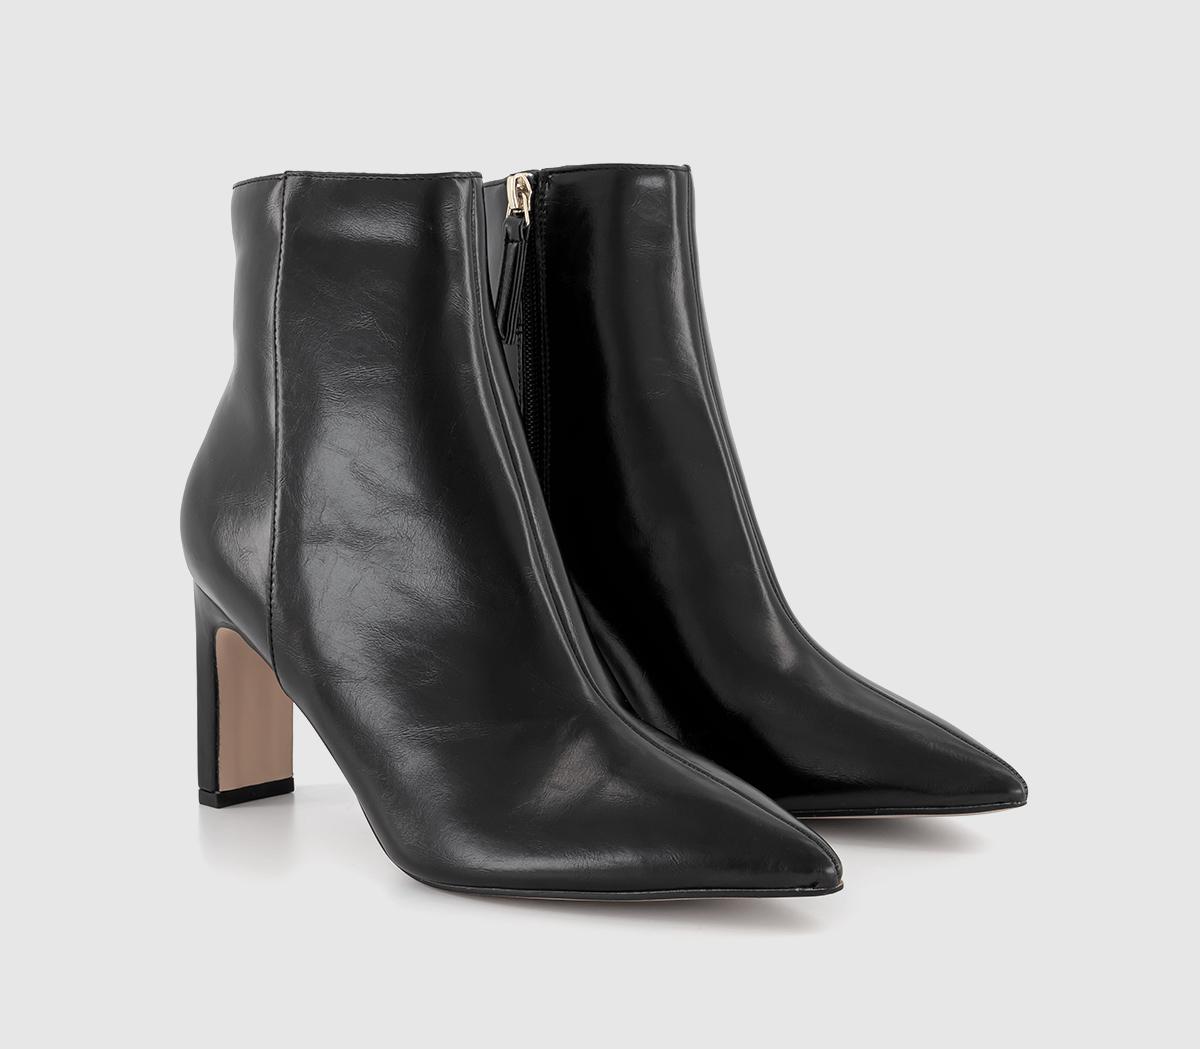 OFFICE Adele Slim Heel Ankle Boots Black - Women's Ankle Boots